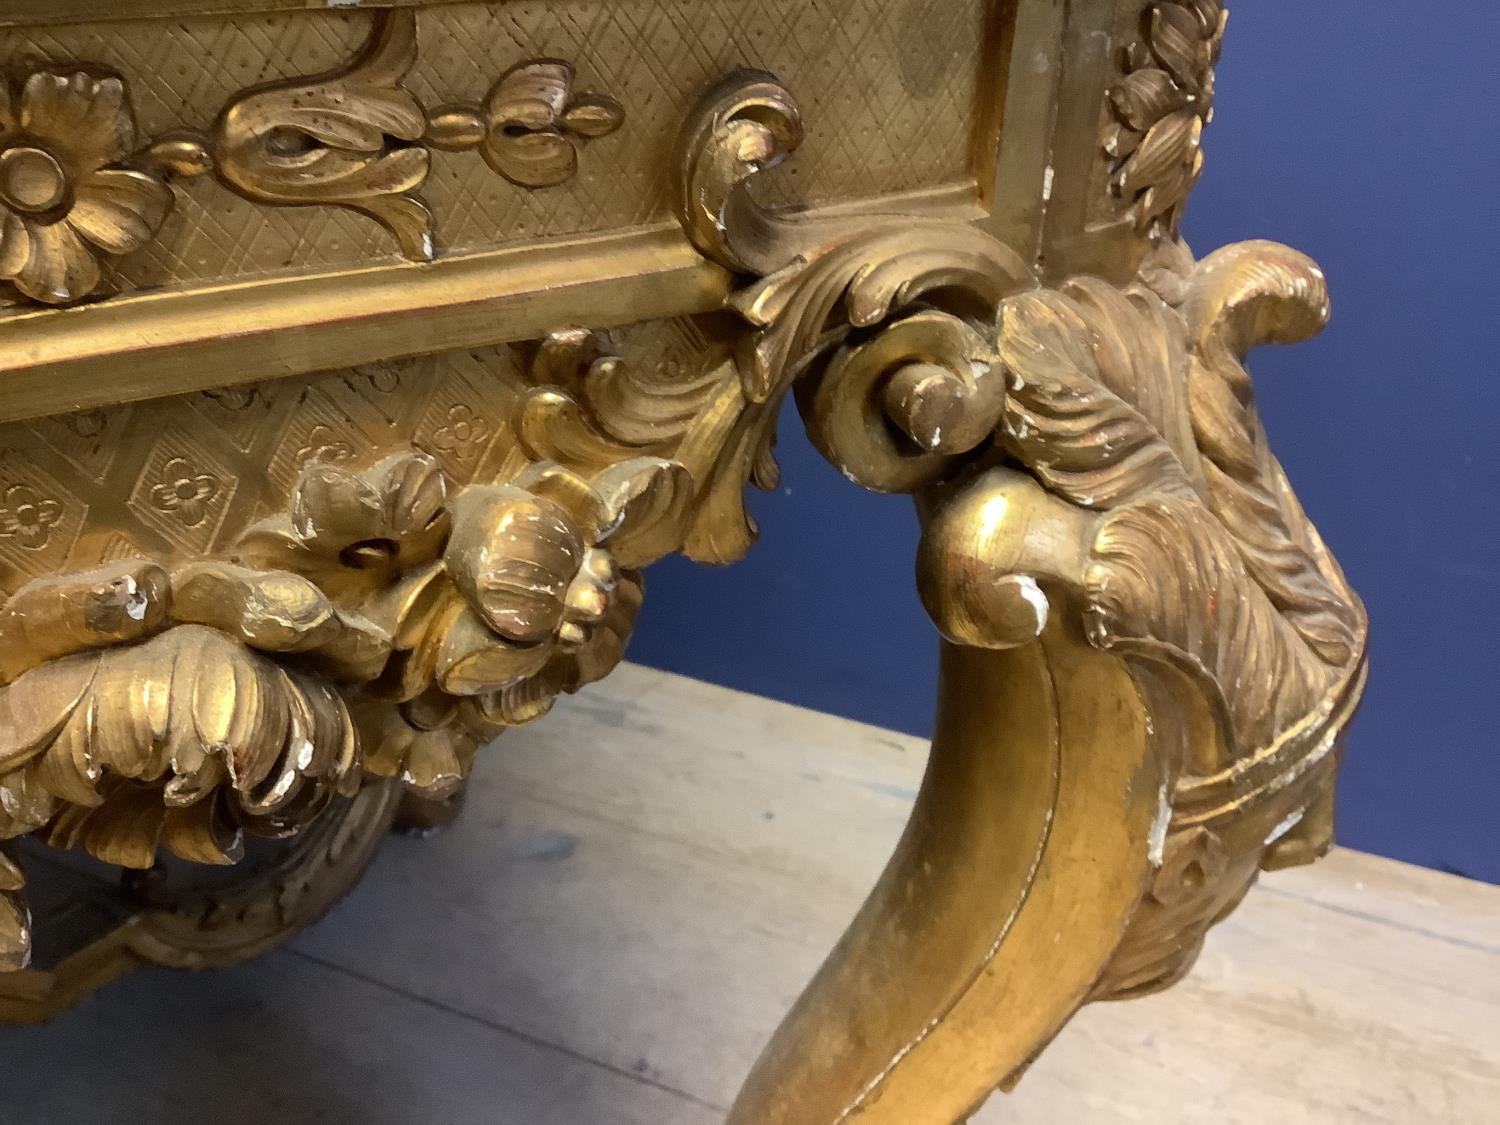 Early C18th/C19th giltwood side table in the manor of William Kent, elaborately carved & gilded unde - Image 7 of 12